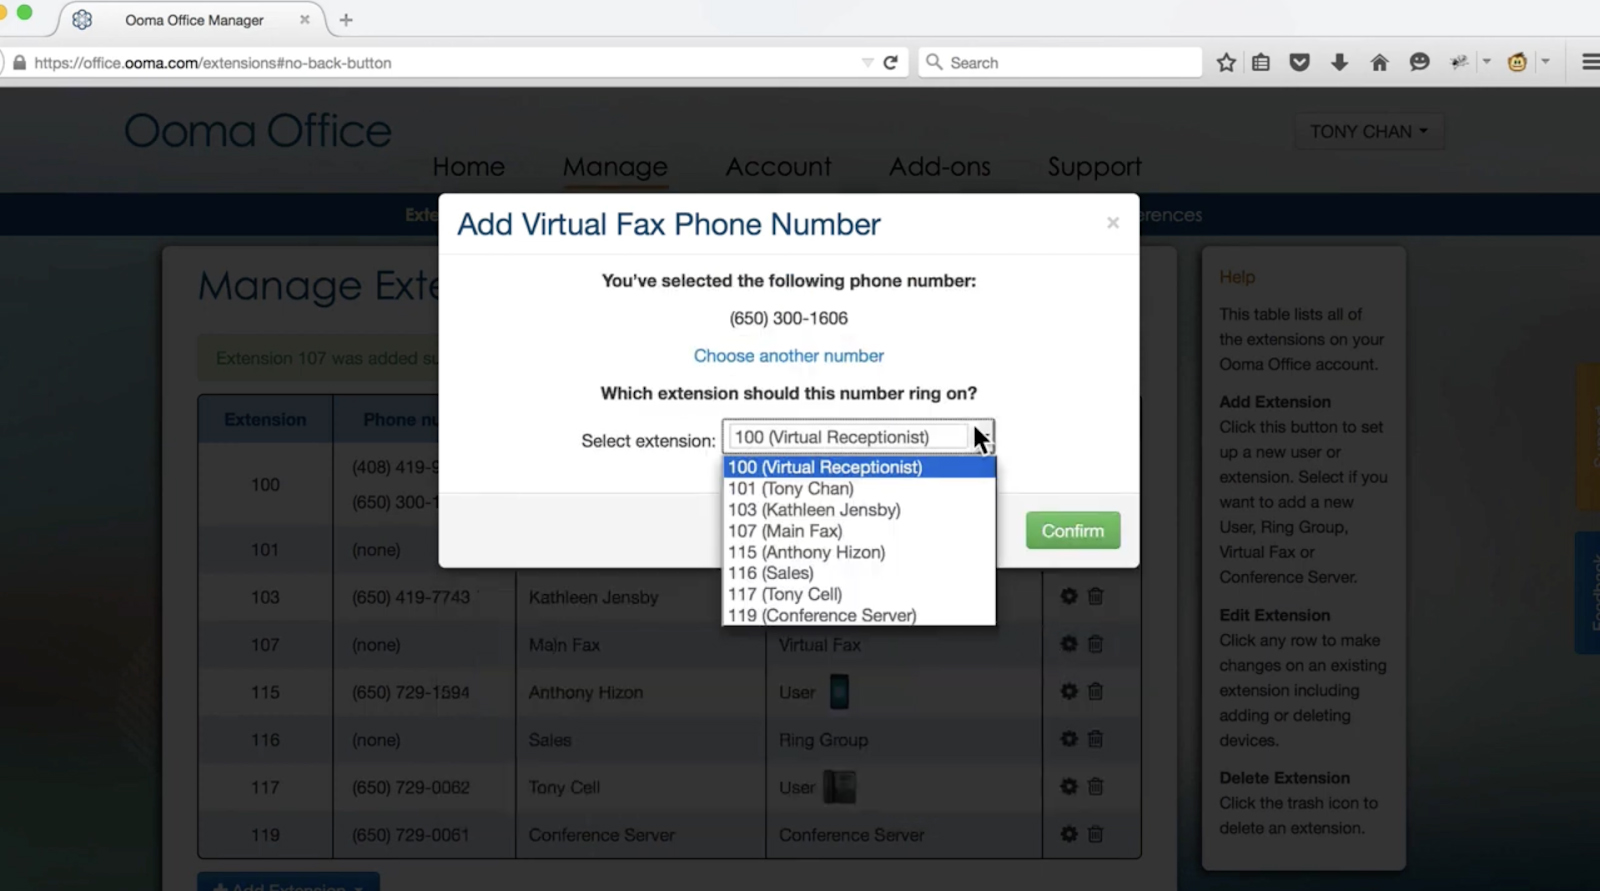 A dialog box in Ooma Office, prompting the user to add a virtual fax phone number and select an extension.